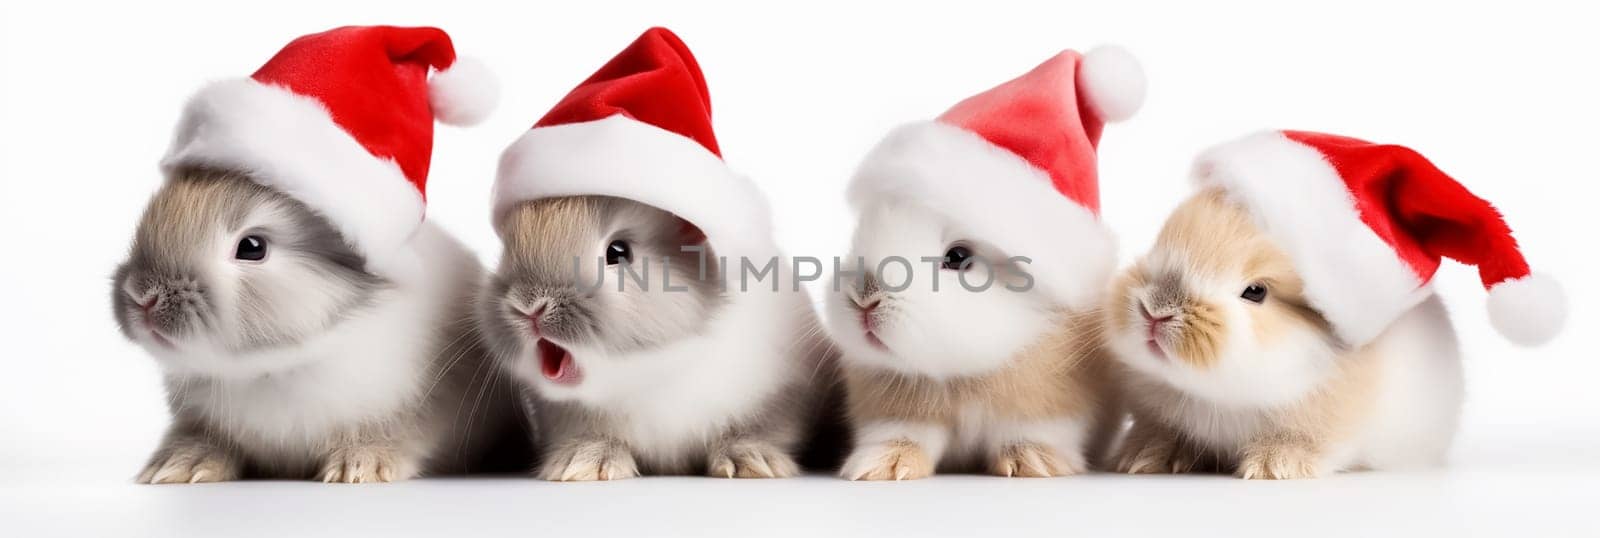 Four funny little rabbits in Christmas hats. Christmas or new year concept with rabbits in red Santa Claus hats. by esvetleishaya